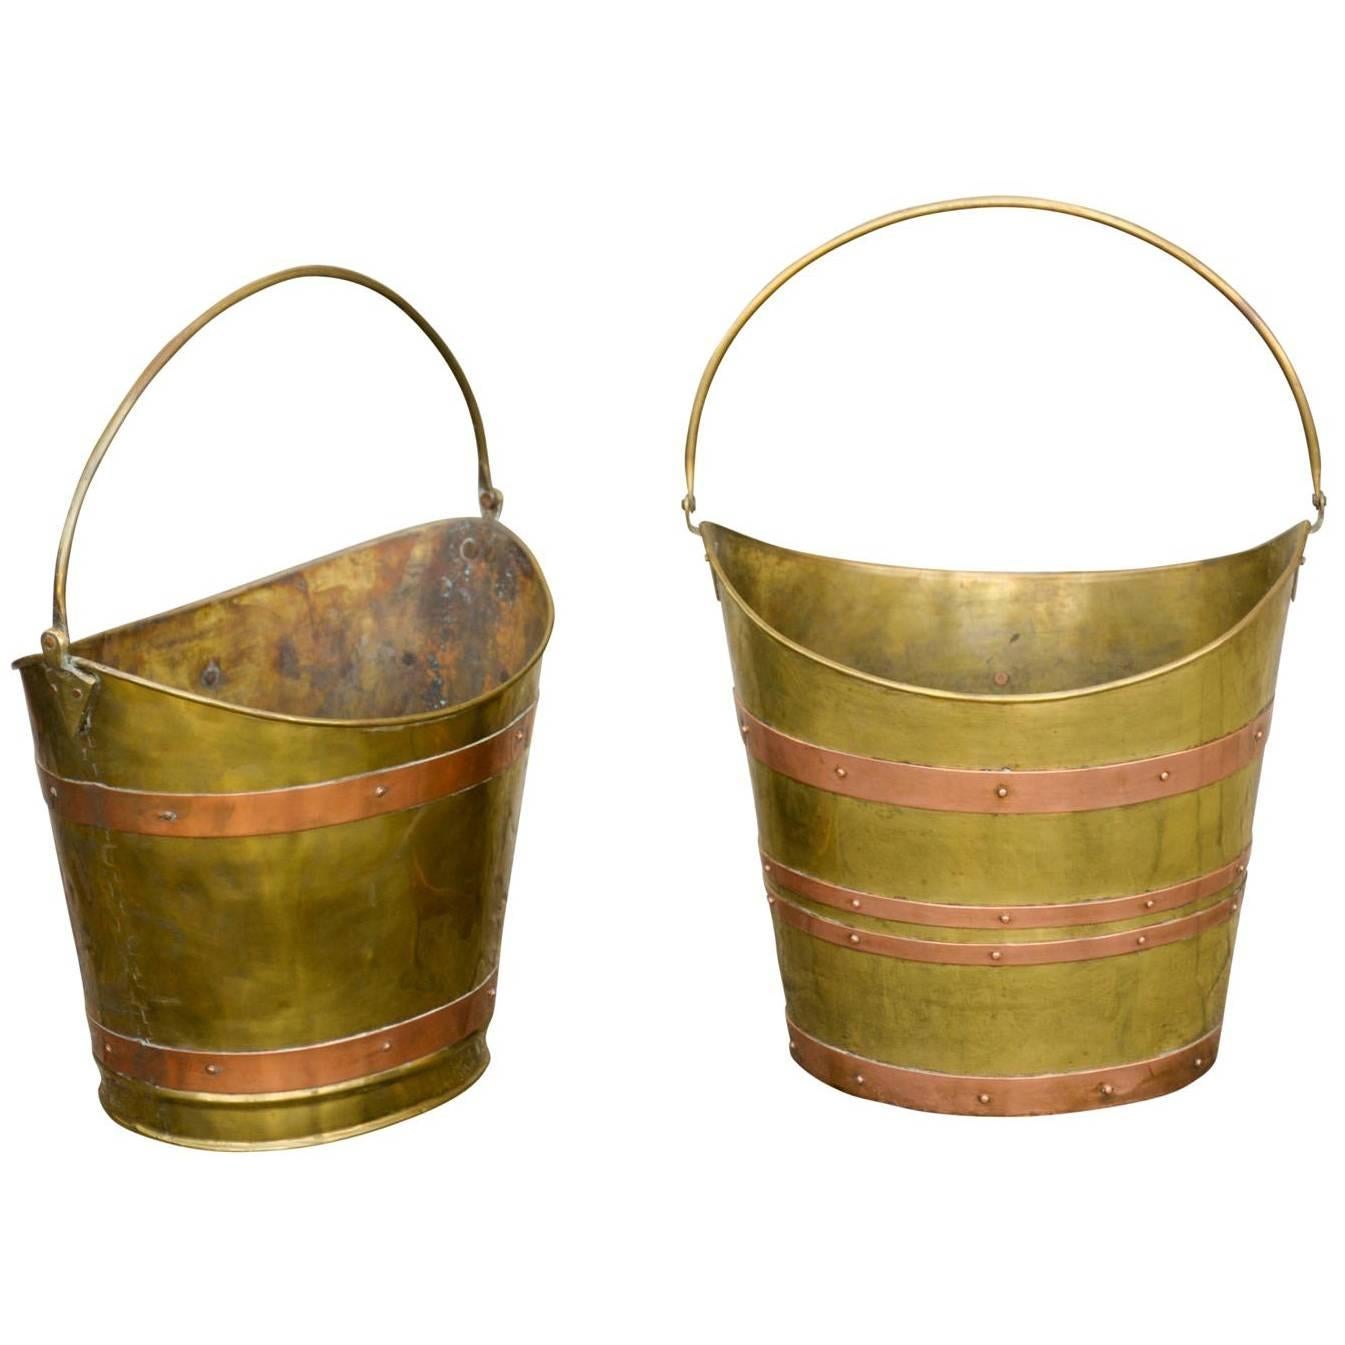 English Wide Mouth Brass Bucket with Copper Straps from the Early 20th Century